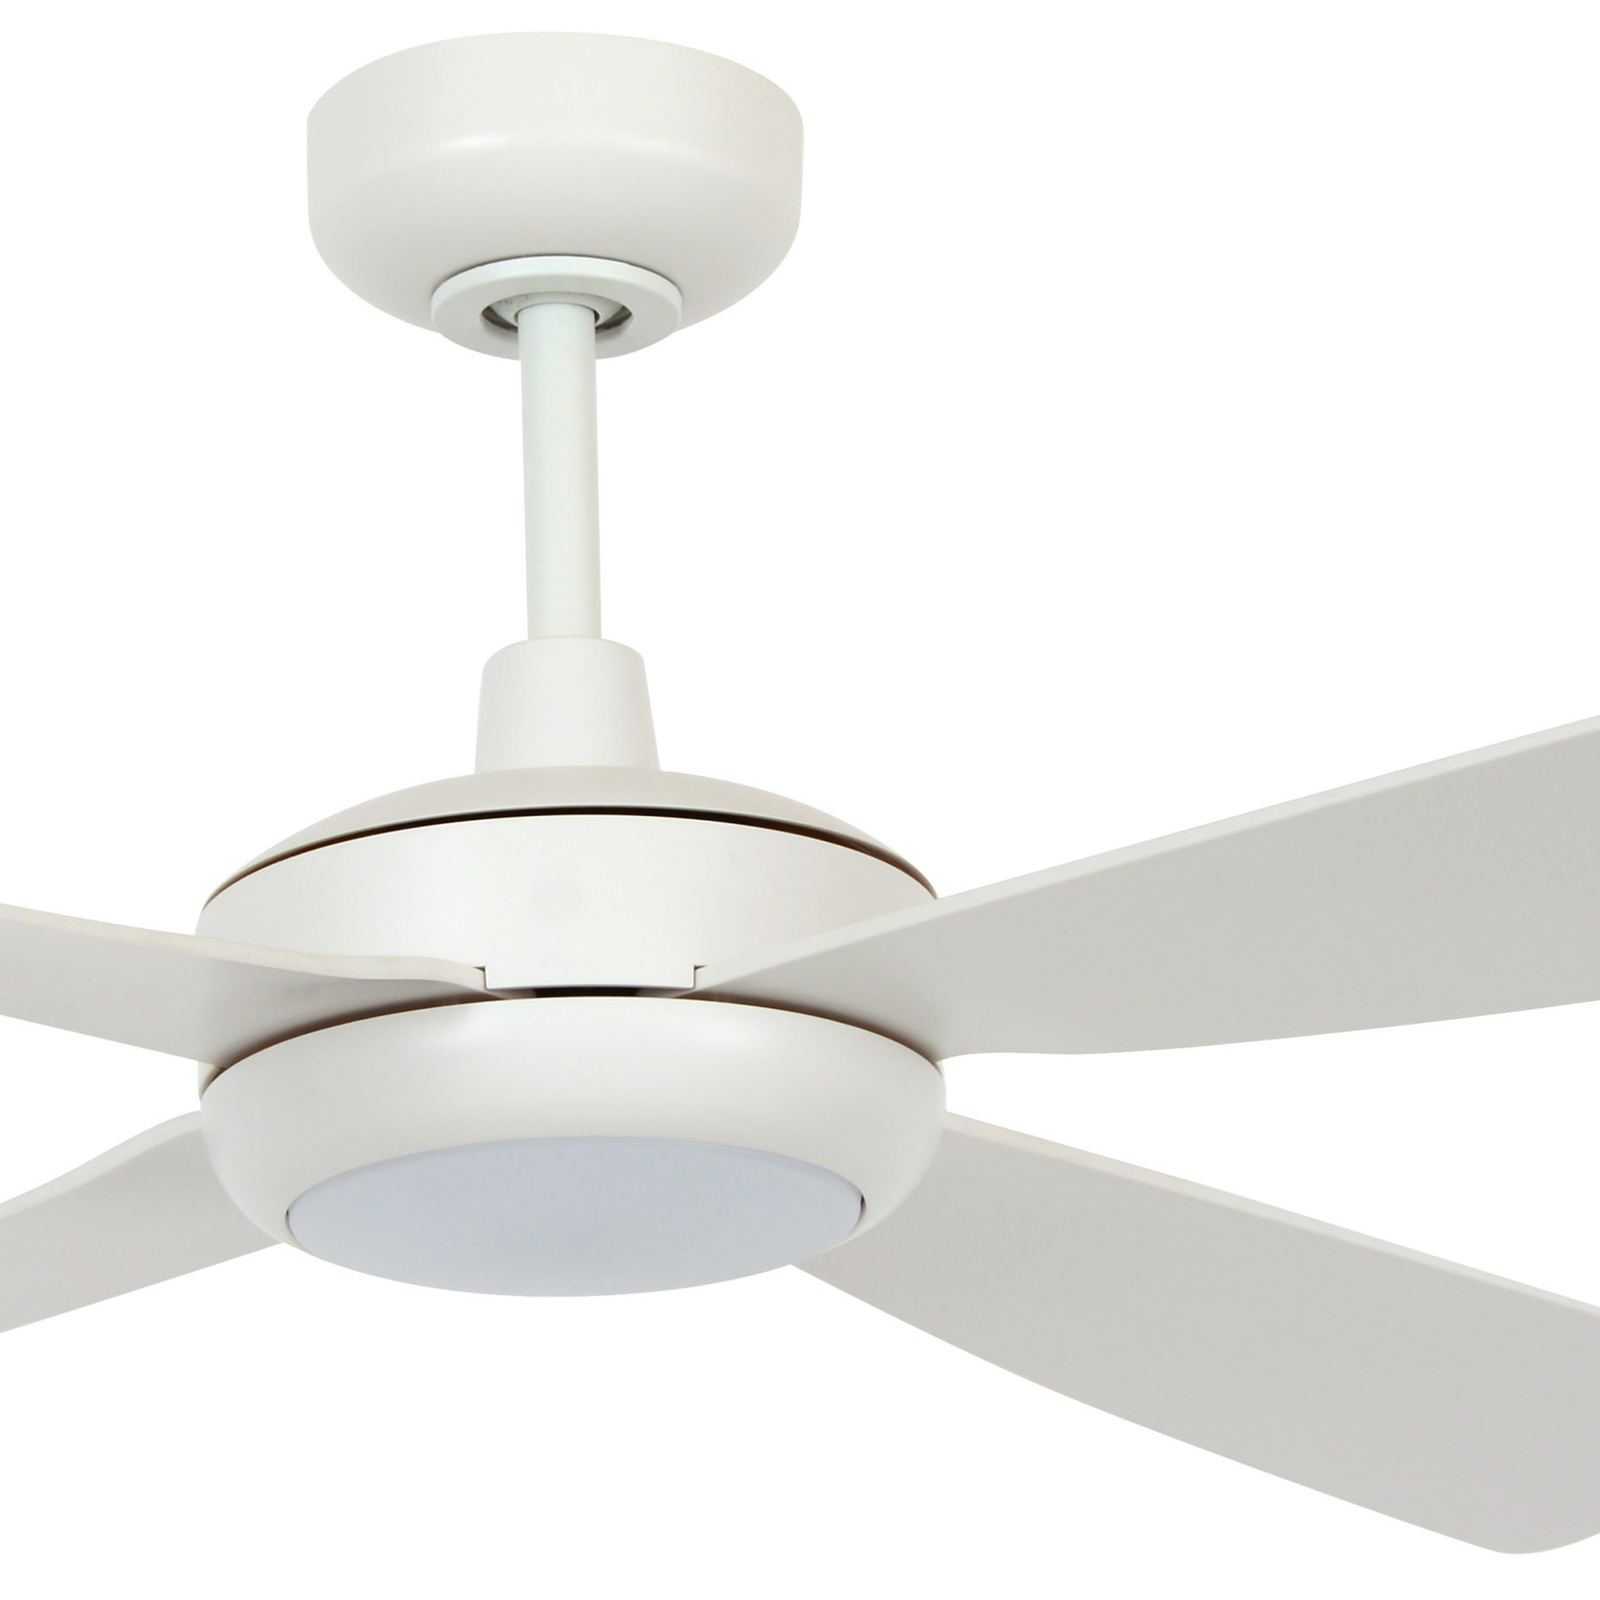 Beacon ceiling fan with light Slipstream, white, quiet